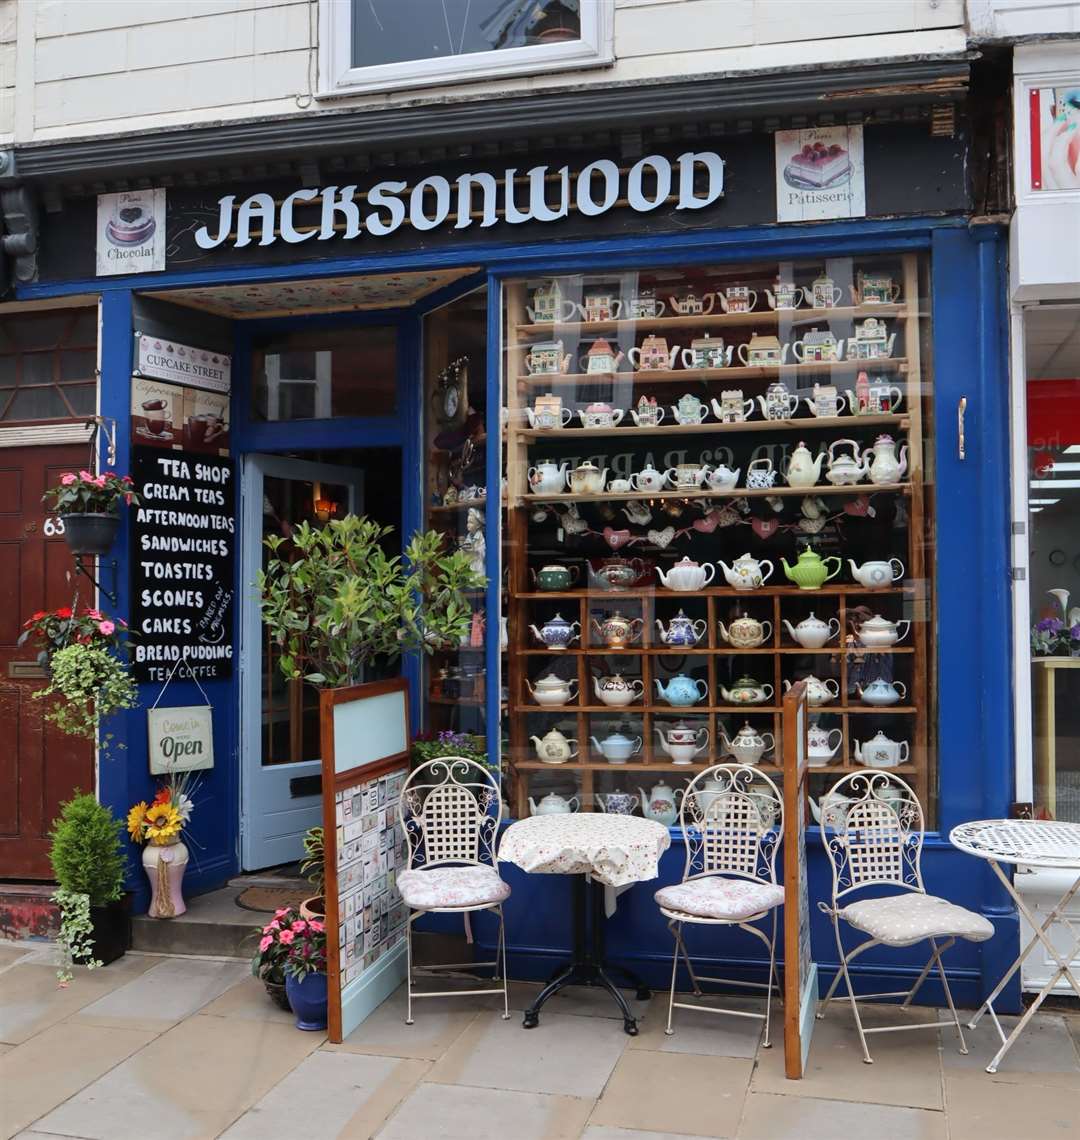 Jacksonwood tea room in Sheerness High Street, Sheppey, has tables on the pavement